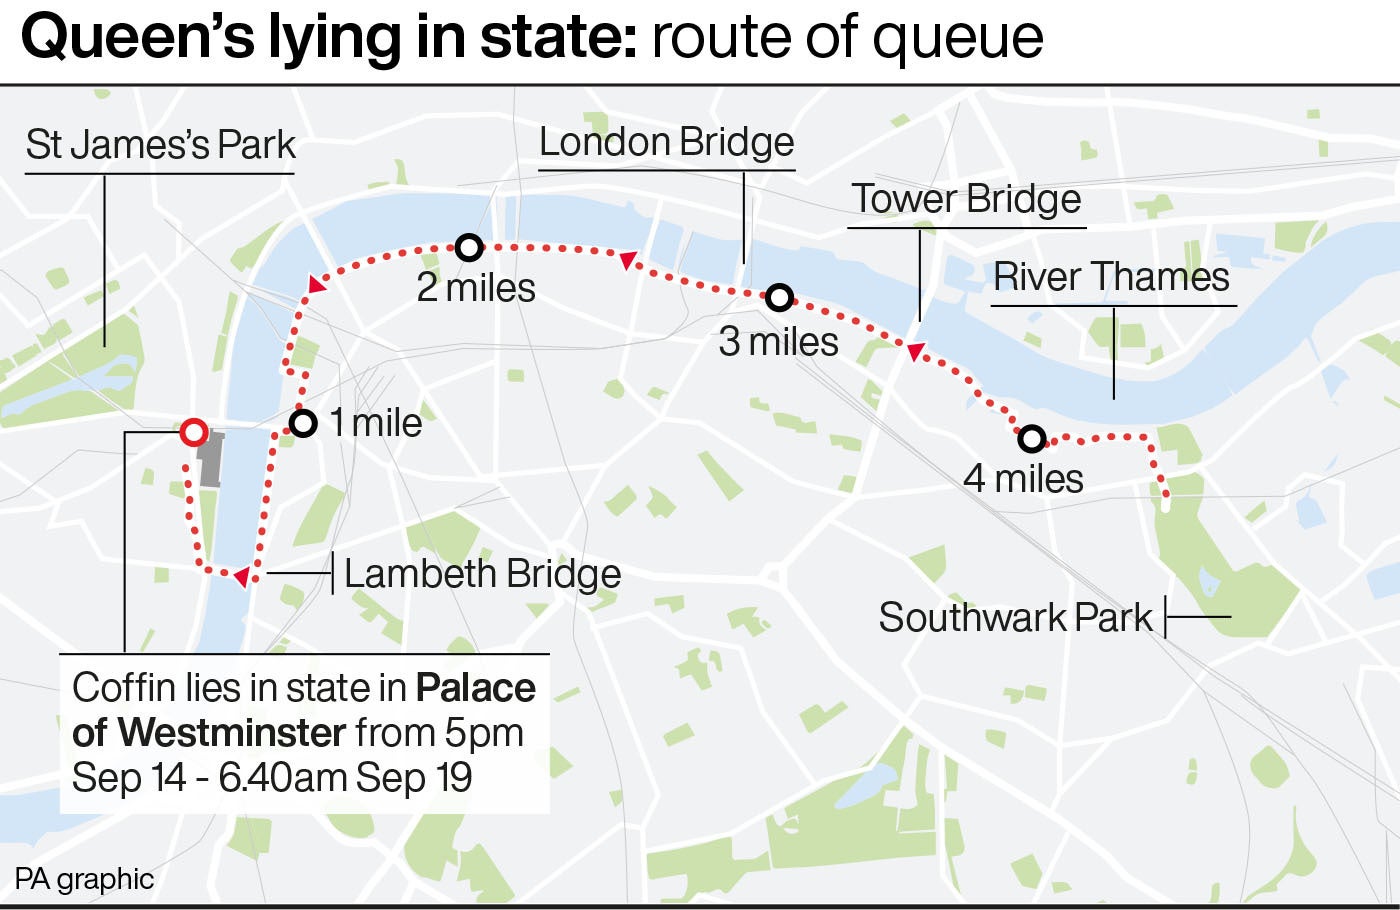 Queen’s lying in state: route of queue